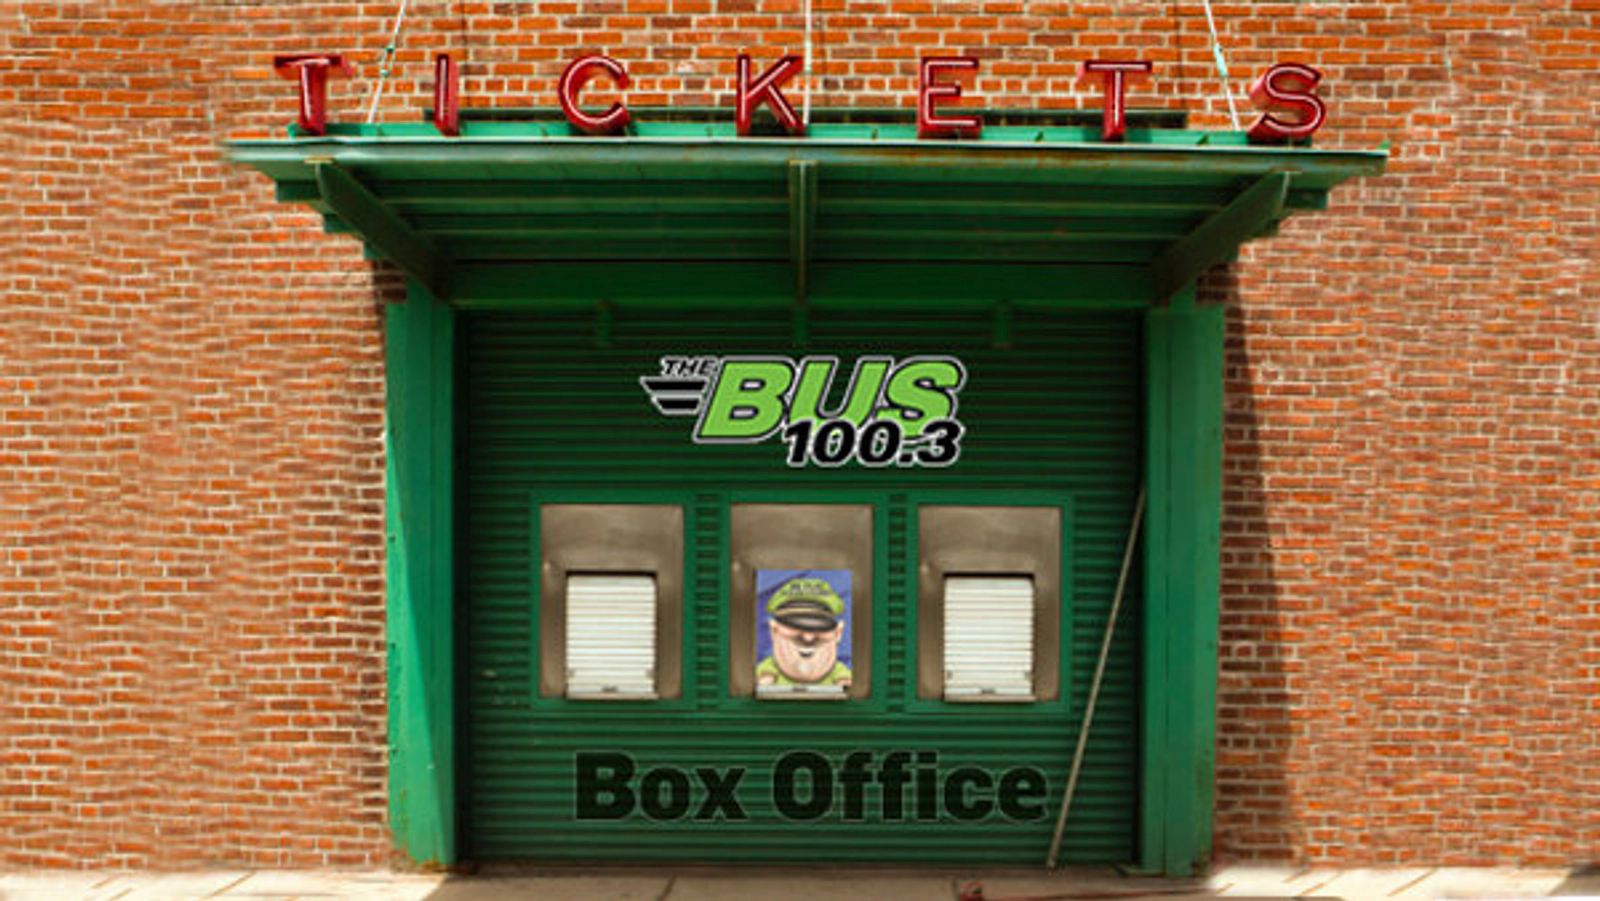      Win CHICAGO Tickets In The Bus Box Office! - Thumbnail Image